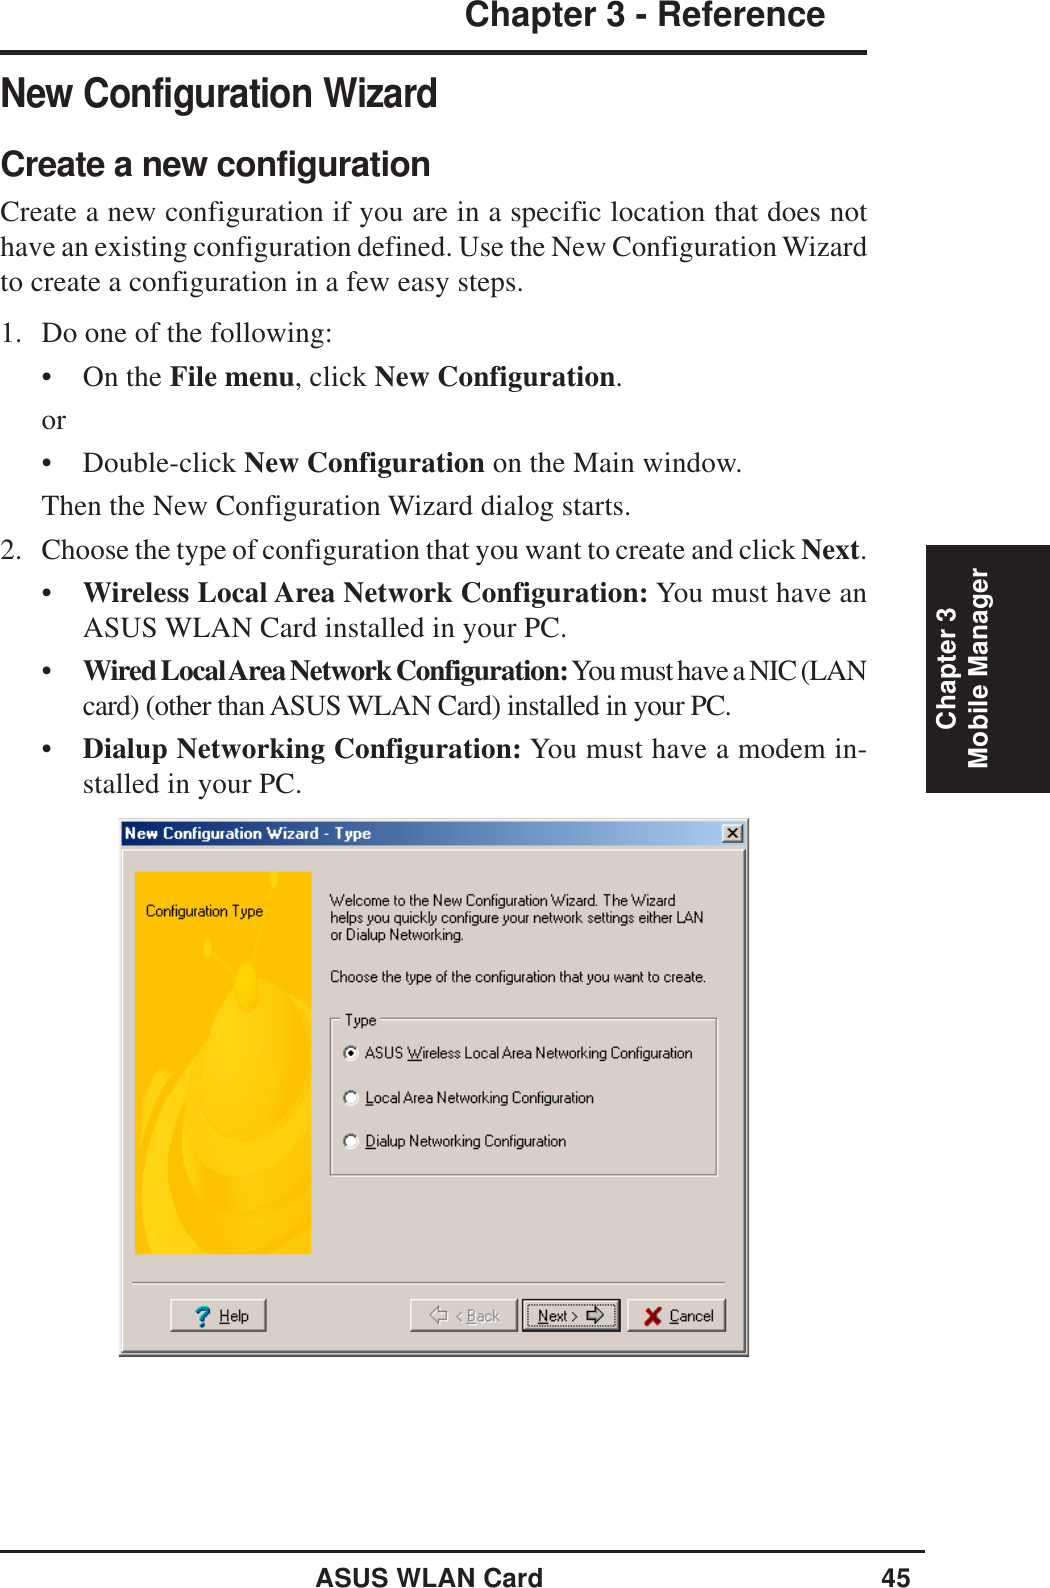 ASUS WLAN Card 45Chapter 3 - ReferenceChapter 3Mobile ManagerNew Configuration WizardCreate a new configurationCreate a new configuration if you are in a specific location that does nothave an existing configuration defined. Use the New Configuration Wizardto create a configuration in a few easy steps.1. Do one of the following:• On the File menu, click New Configuration.or• Double-click New Configuration on the Main window.Then the New Configuration Wizard dialog starts.2. Choose the type of configuration that you want to create and click Next.•Wireless Local Area Network Configuration: You must have anASUS WLAN Card installed in your PC.•Wired Local Area Network Configuration: You must have a NIC (LANcard) (other than ASUS WLAN Card) installed in your PC.•Dialup Networking Configuration: You must have a modem in-stalled in your PC.